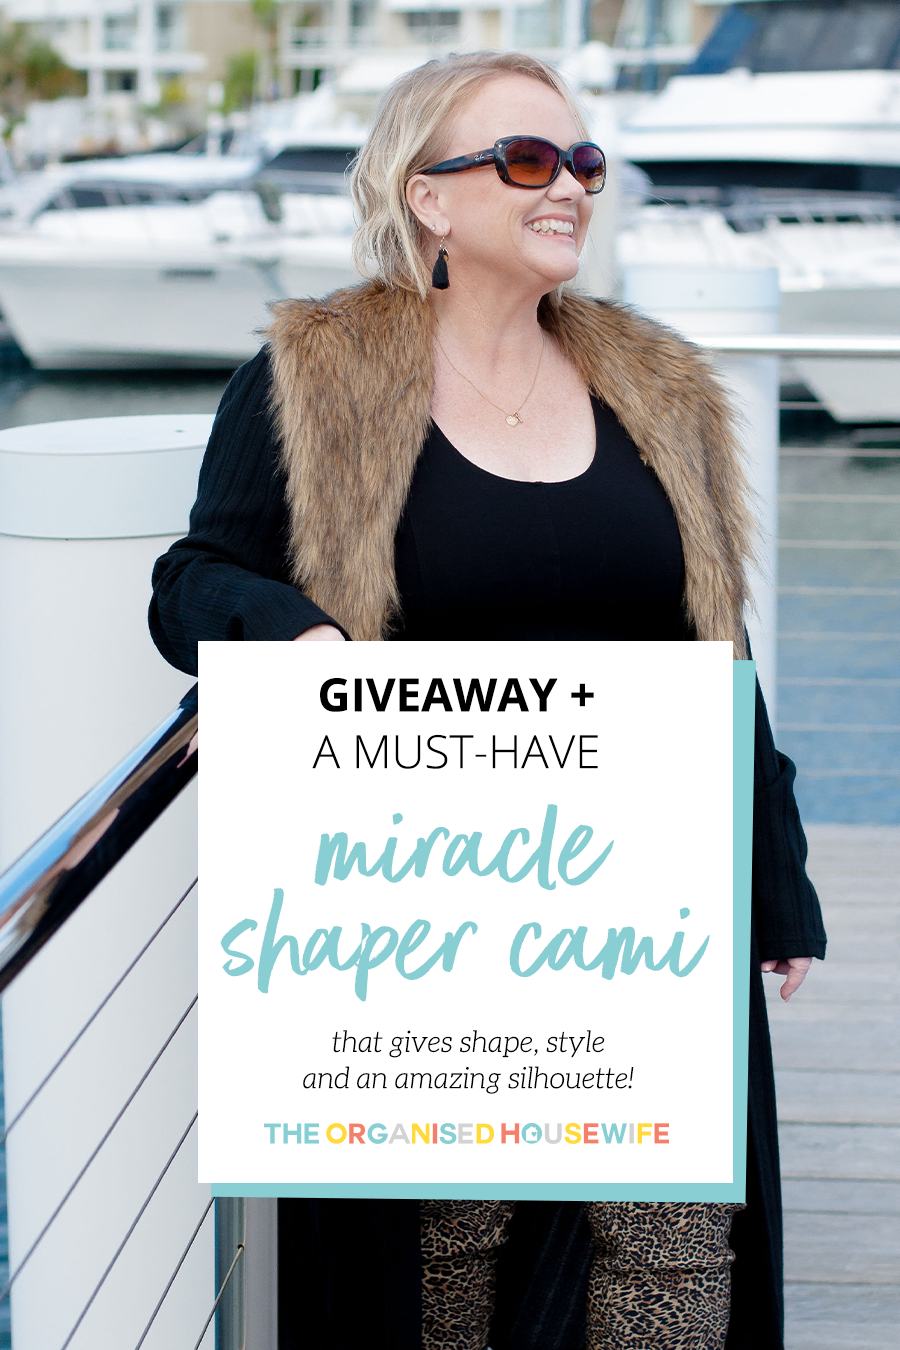 https://theorganisedhousewife.com.au/wp-content/uploads/2019/06/must-have-miracle-shaper-cami.png